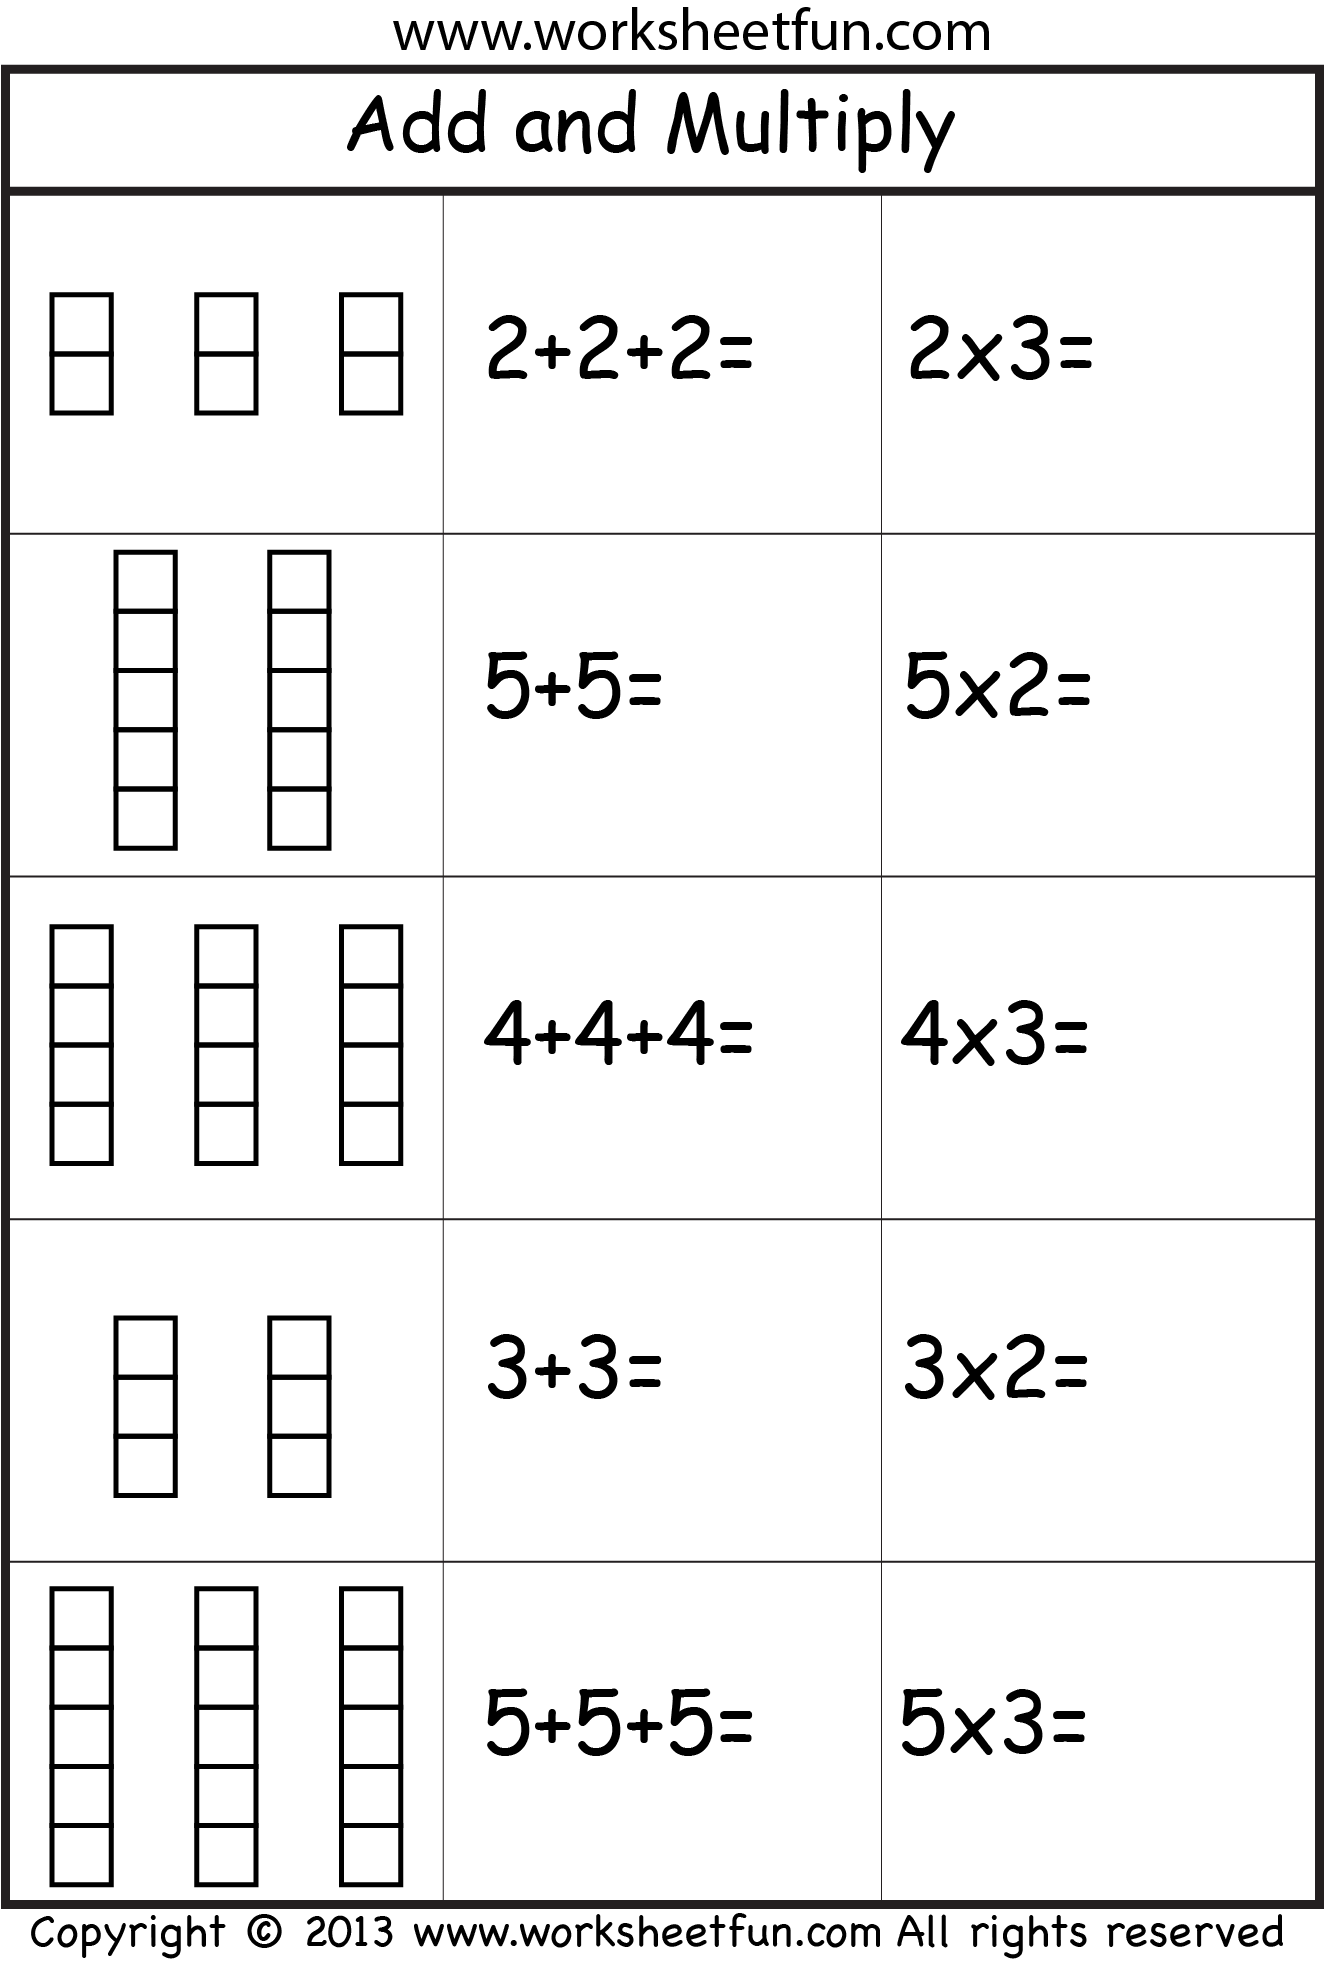 free-1-digit-multiplication-math-worksheet-multiply-by-2-free4classrooms